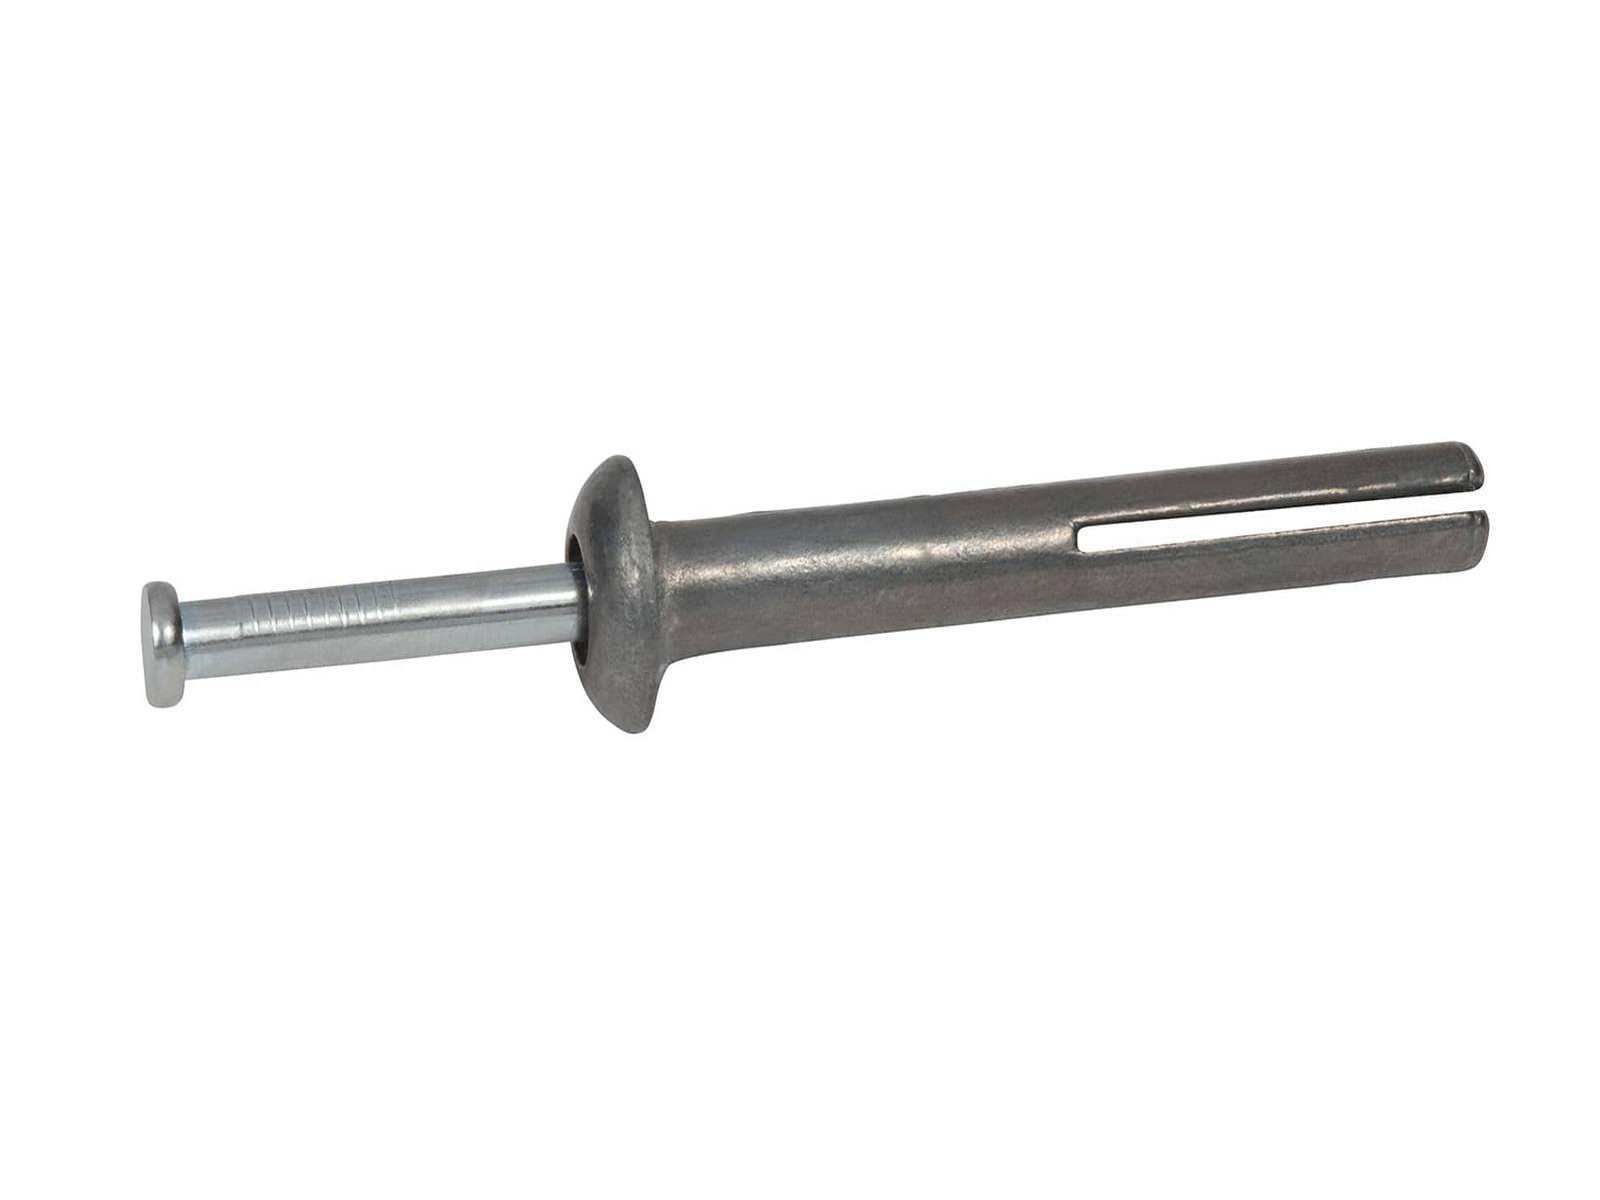 Concrete Anchor Drive Pin Nail On Expansion Stainless Steel 1/4 x 2 Qty 250 